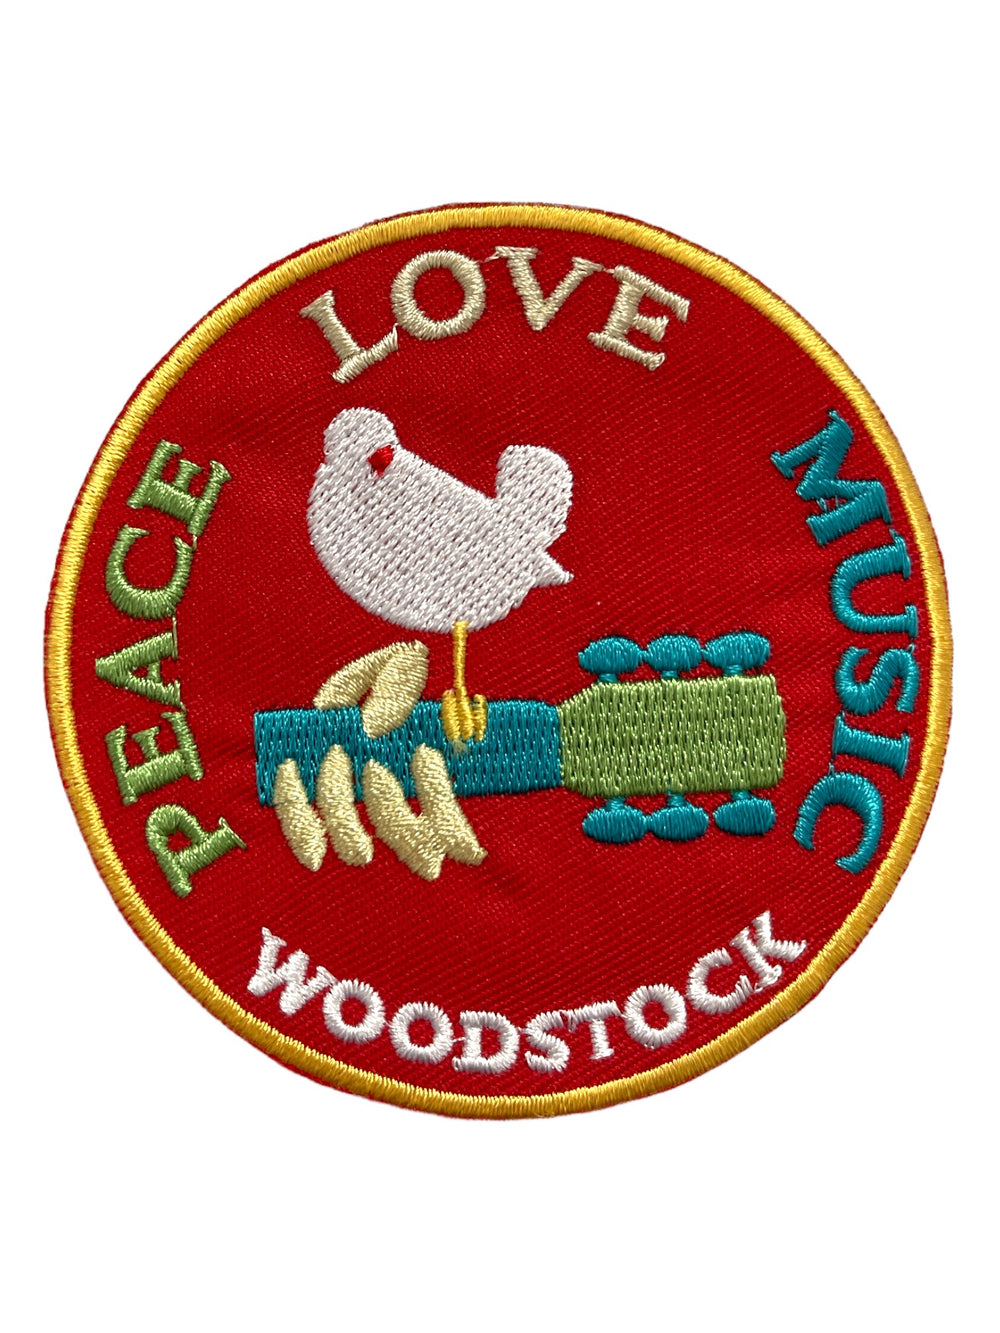 Woodstock Music Festival  Official Woven Patch Brand New